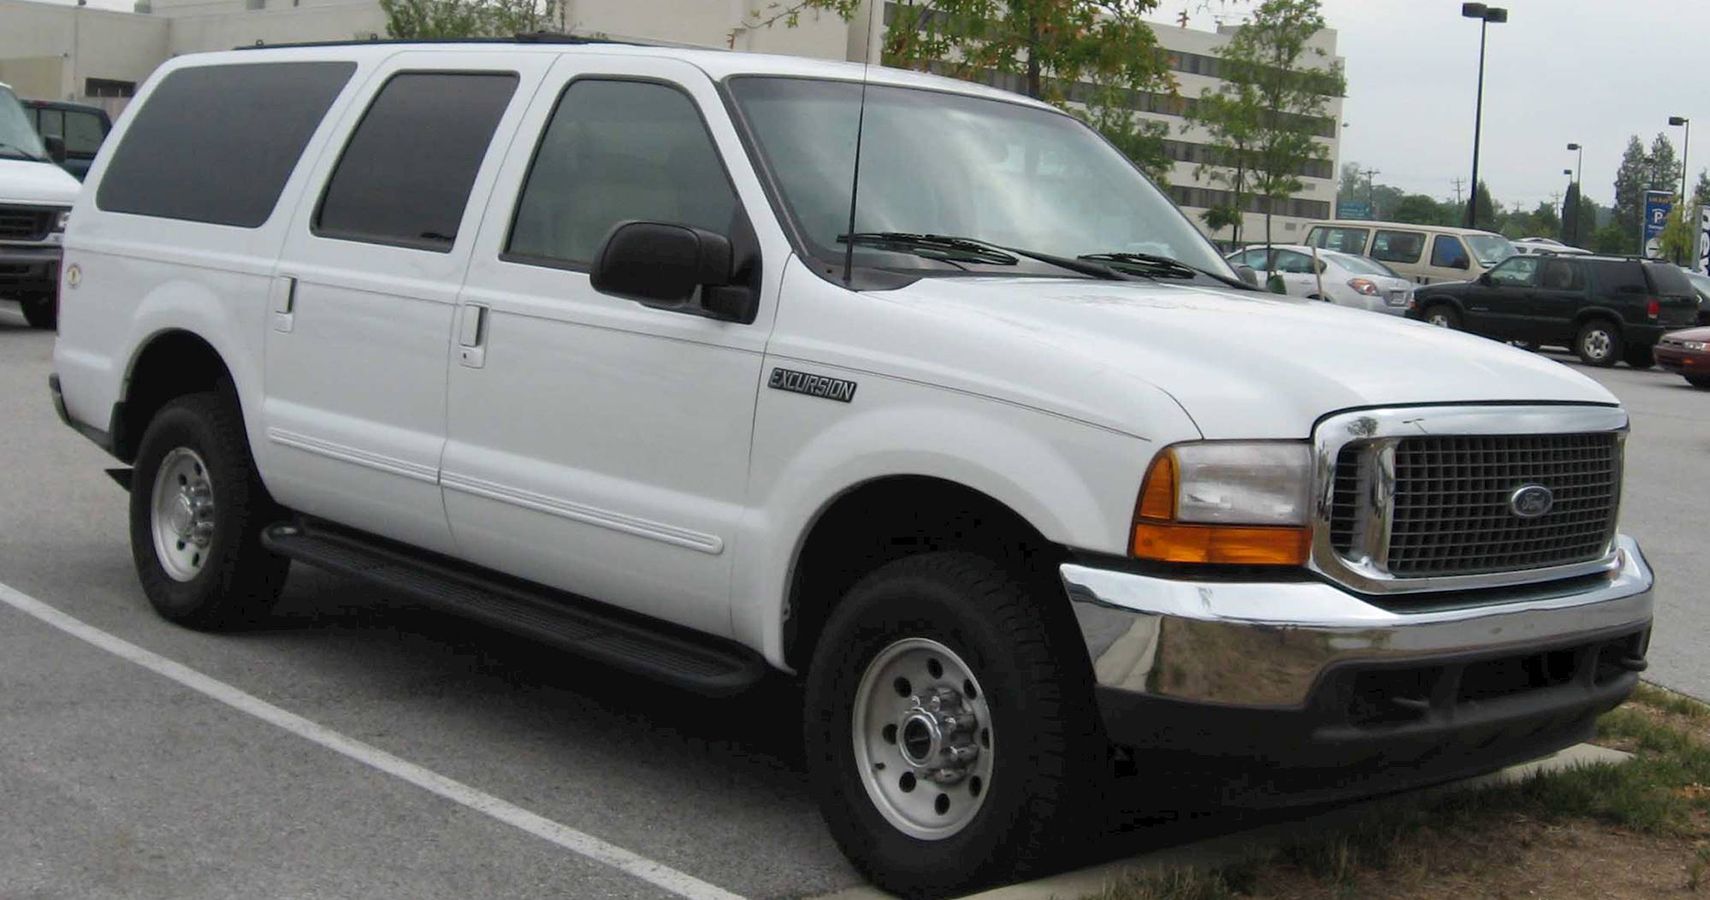 2000 Ford Excursion: A Little Too Much